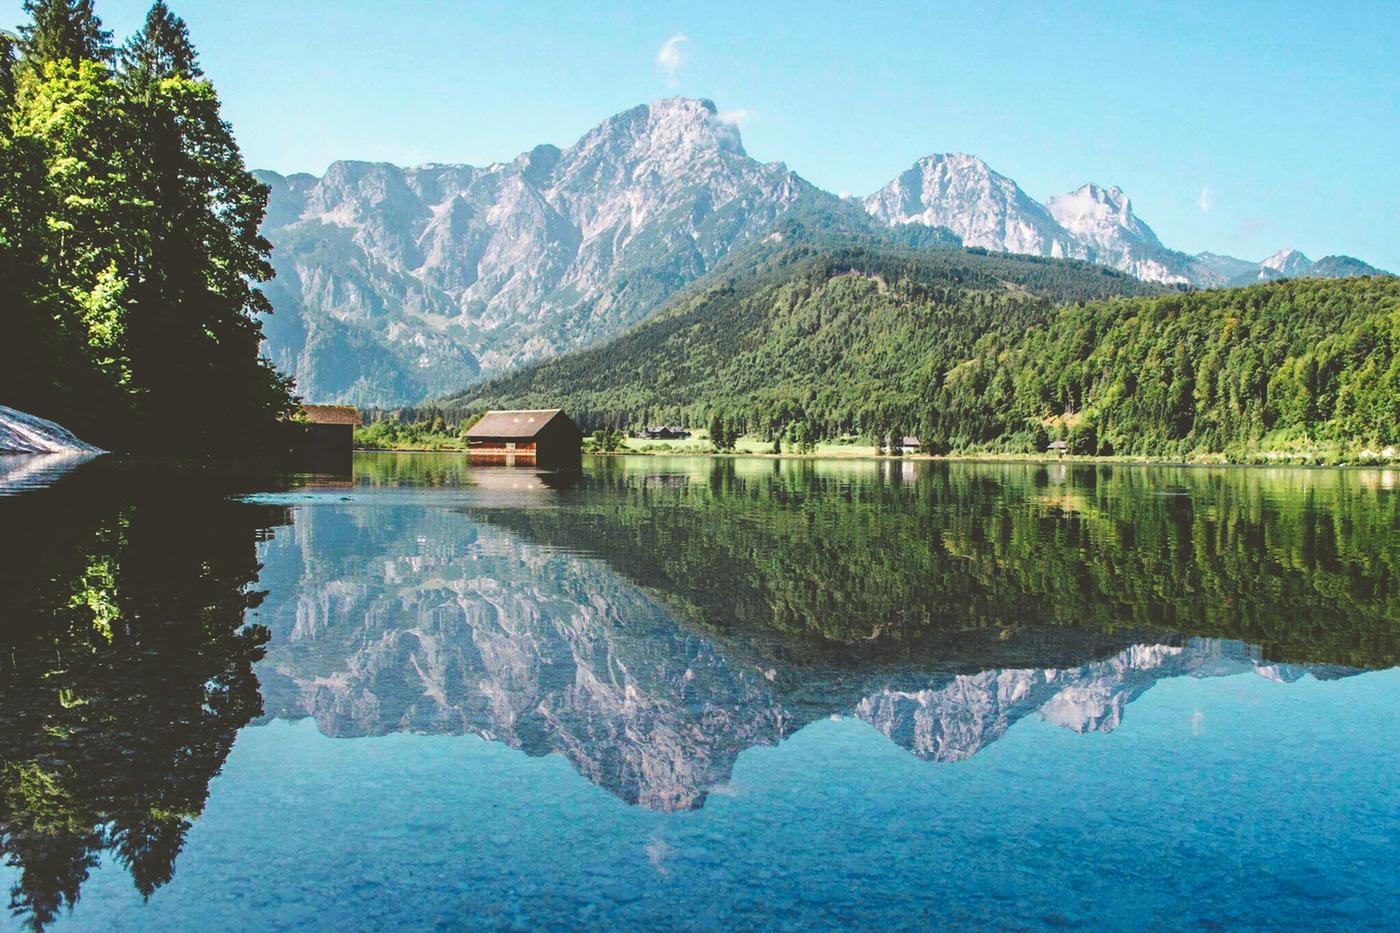 Austria: A country full of wonders